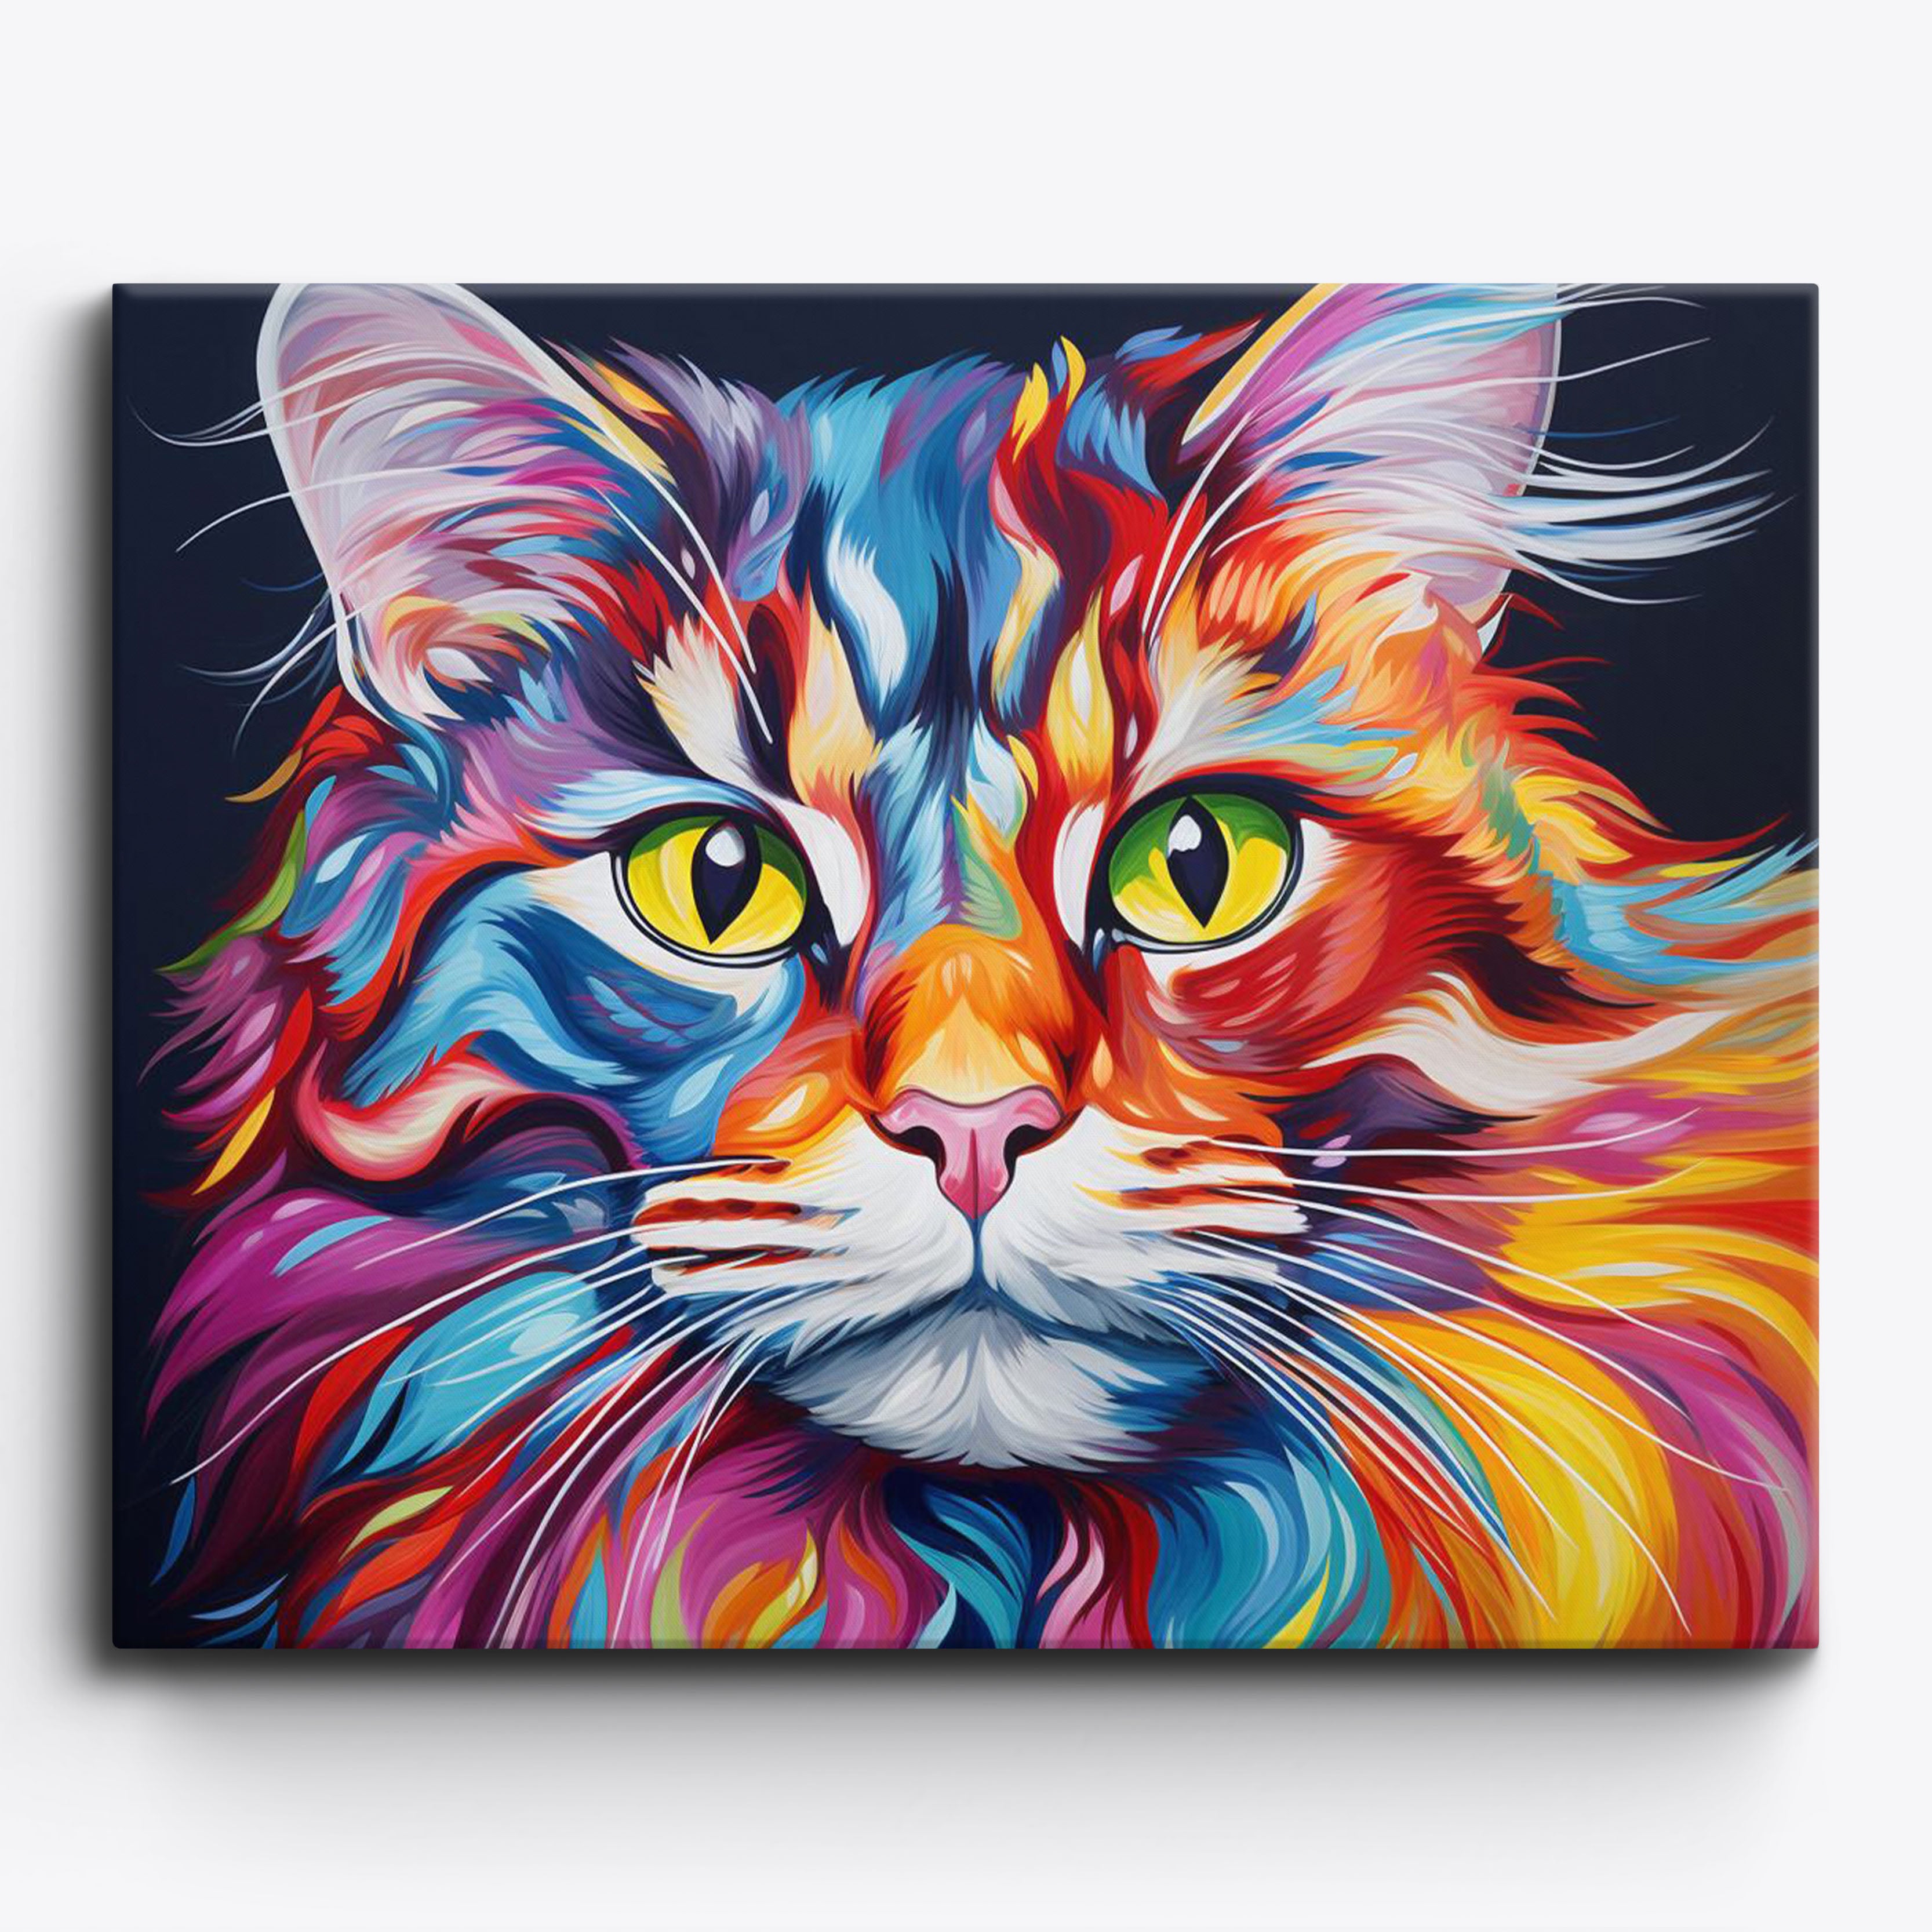 Cat Face DIY Paint By Numbers Kit Acrylic Painting On Canvas